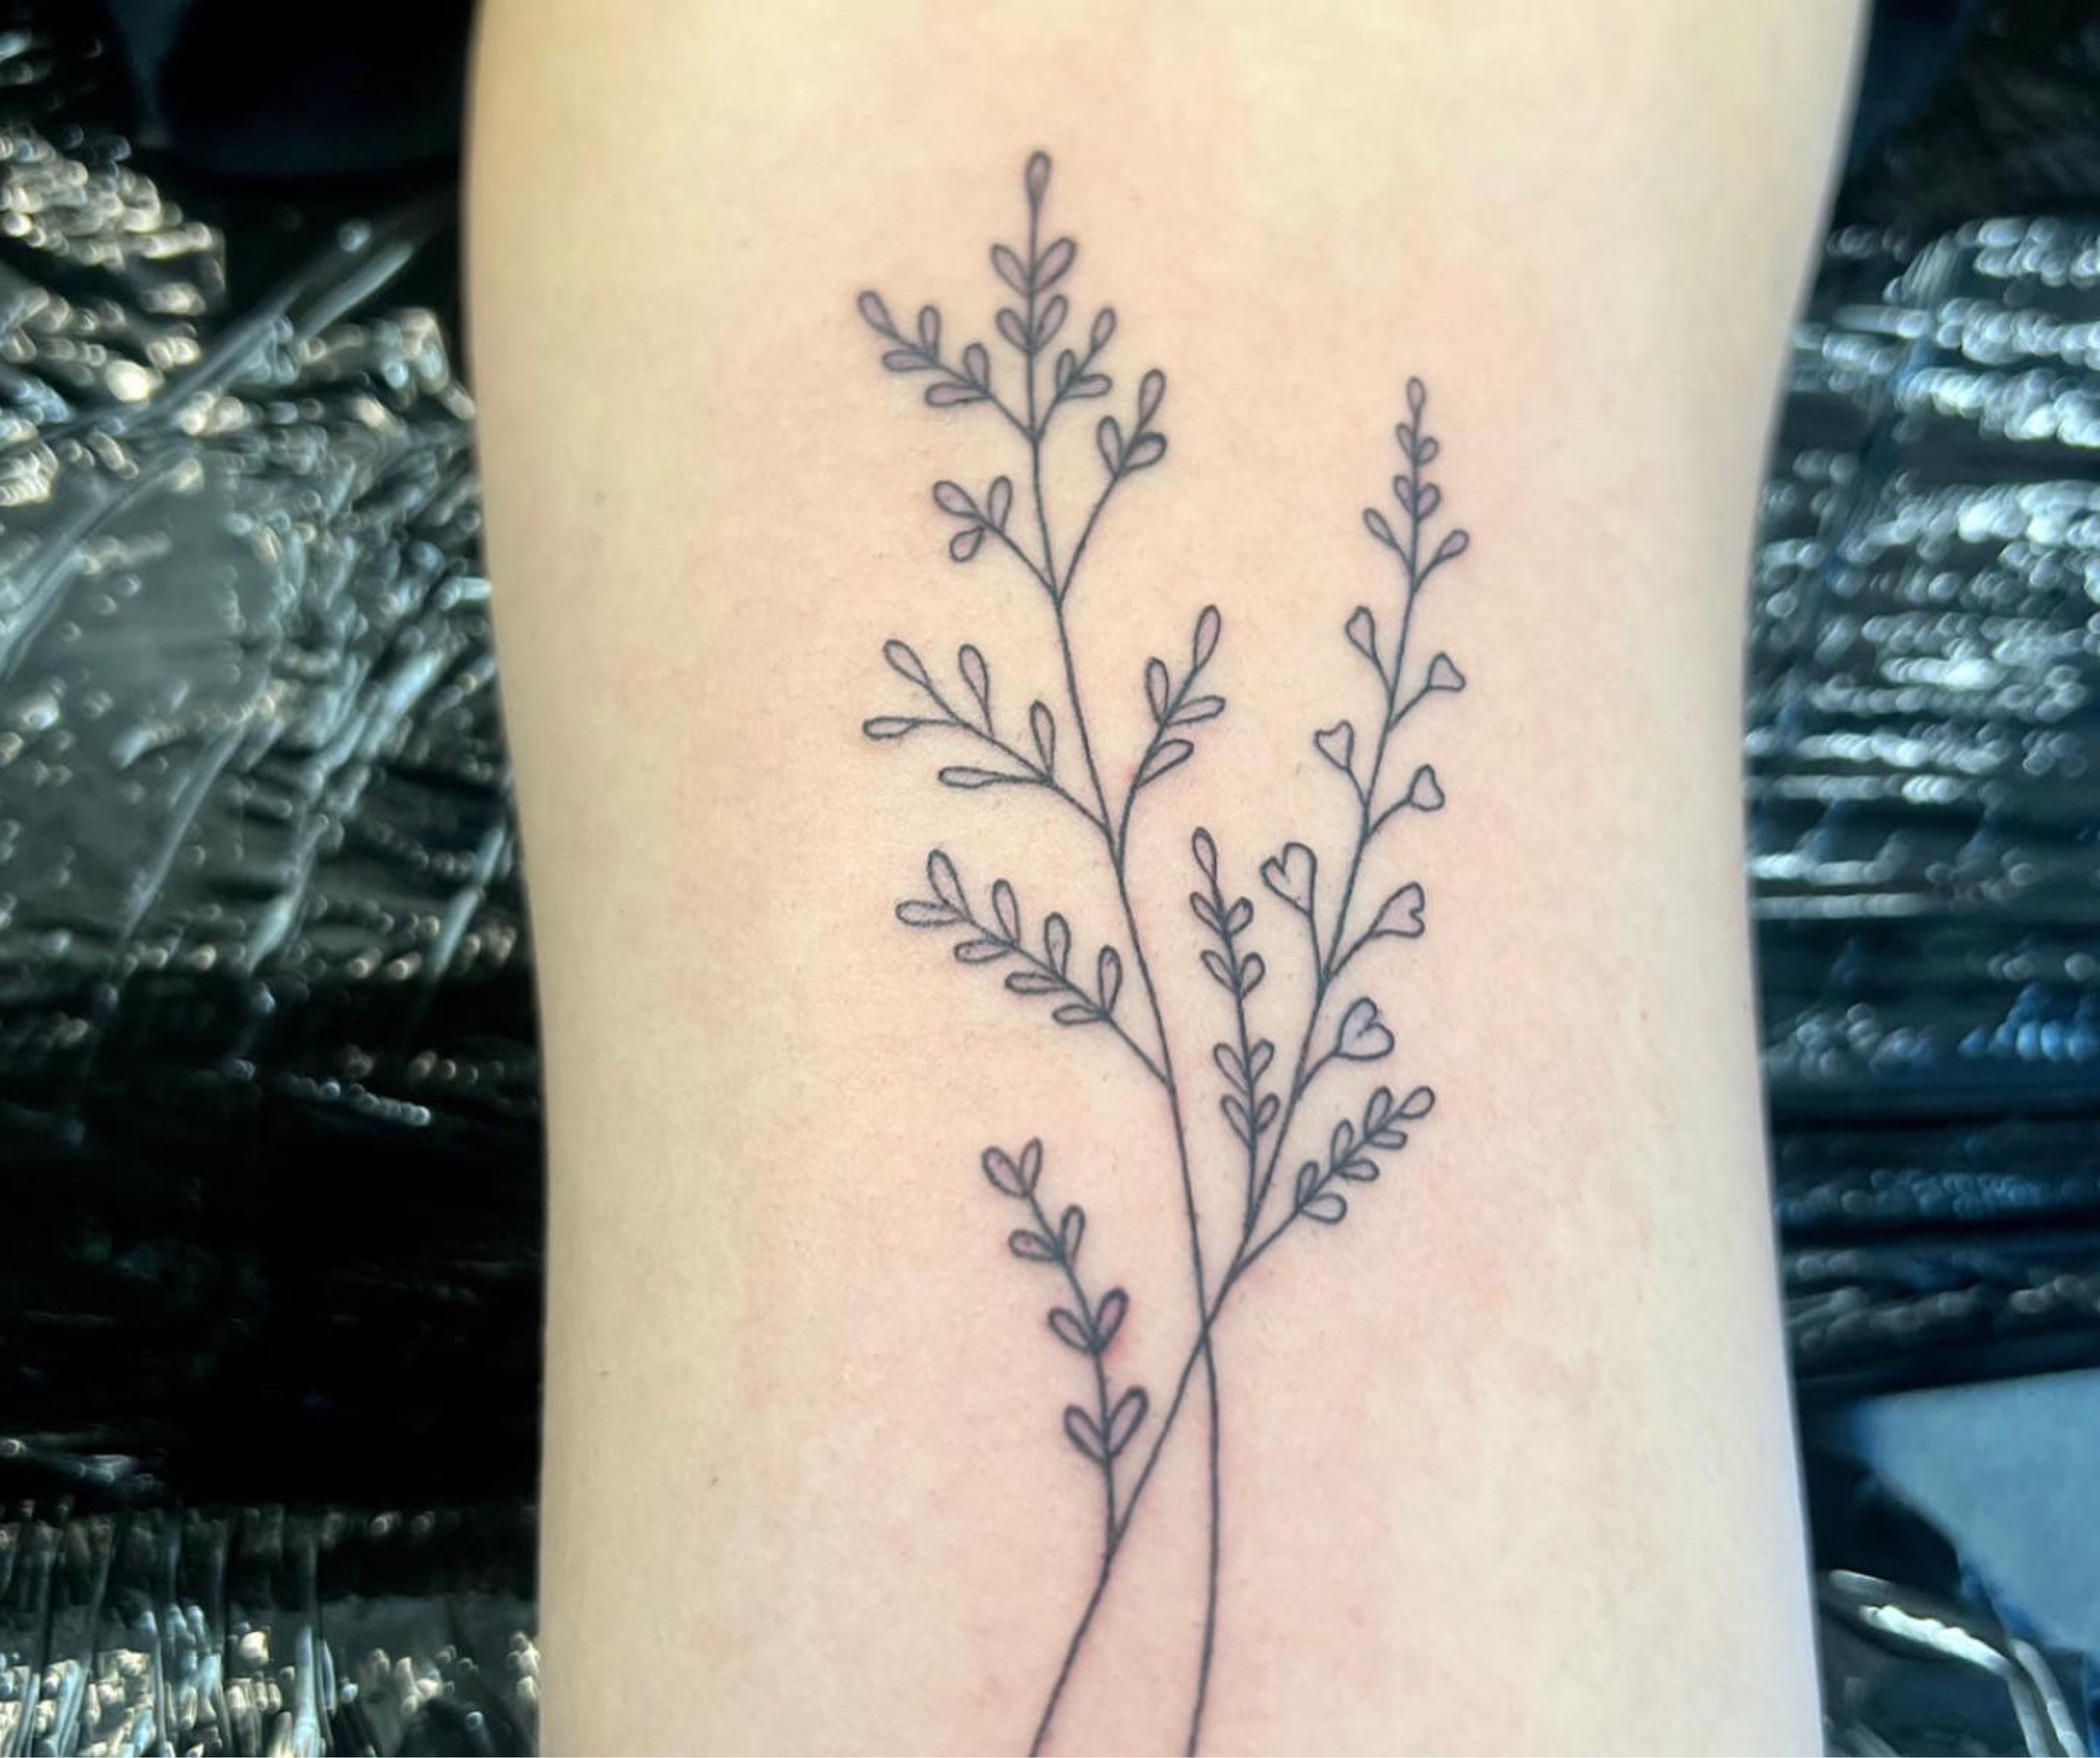 Some flowers I did for Heather a month or so ago and forgot to post   Steadfast Tattoo